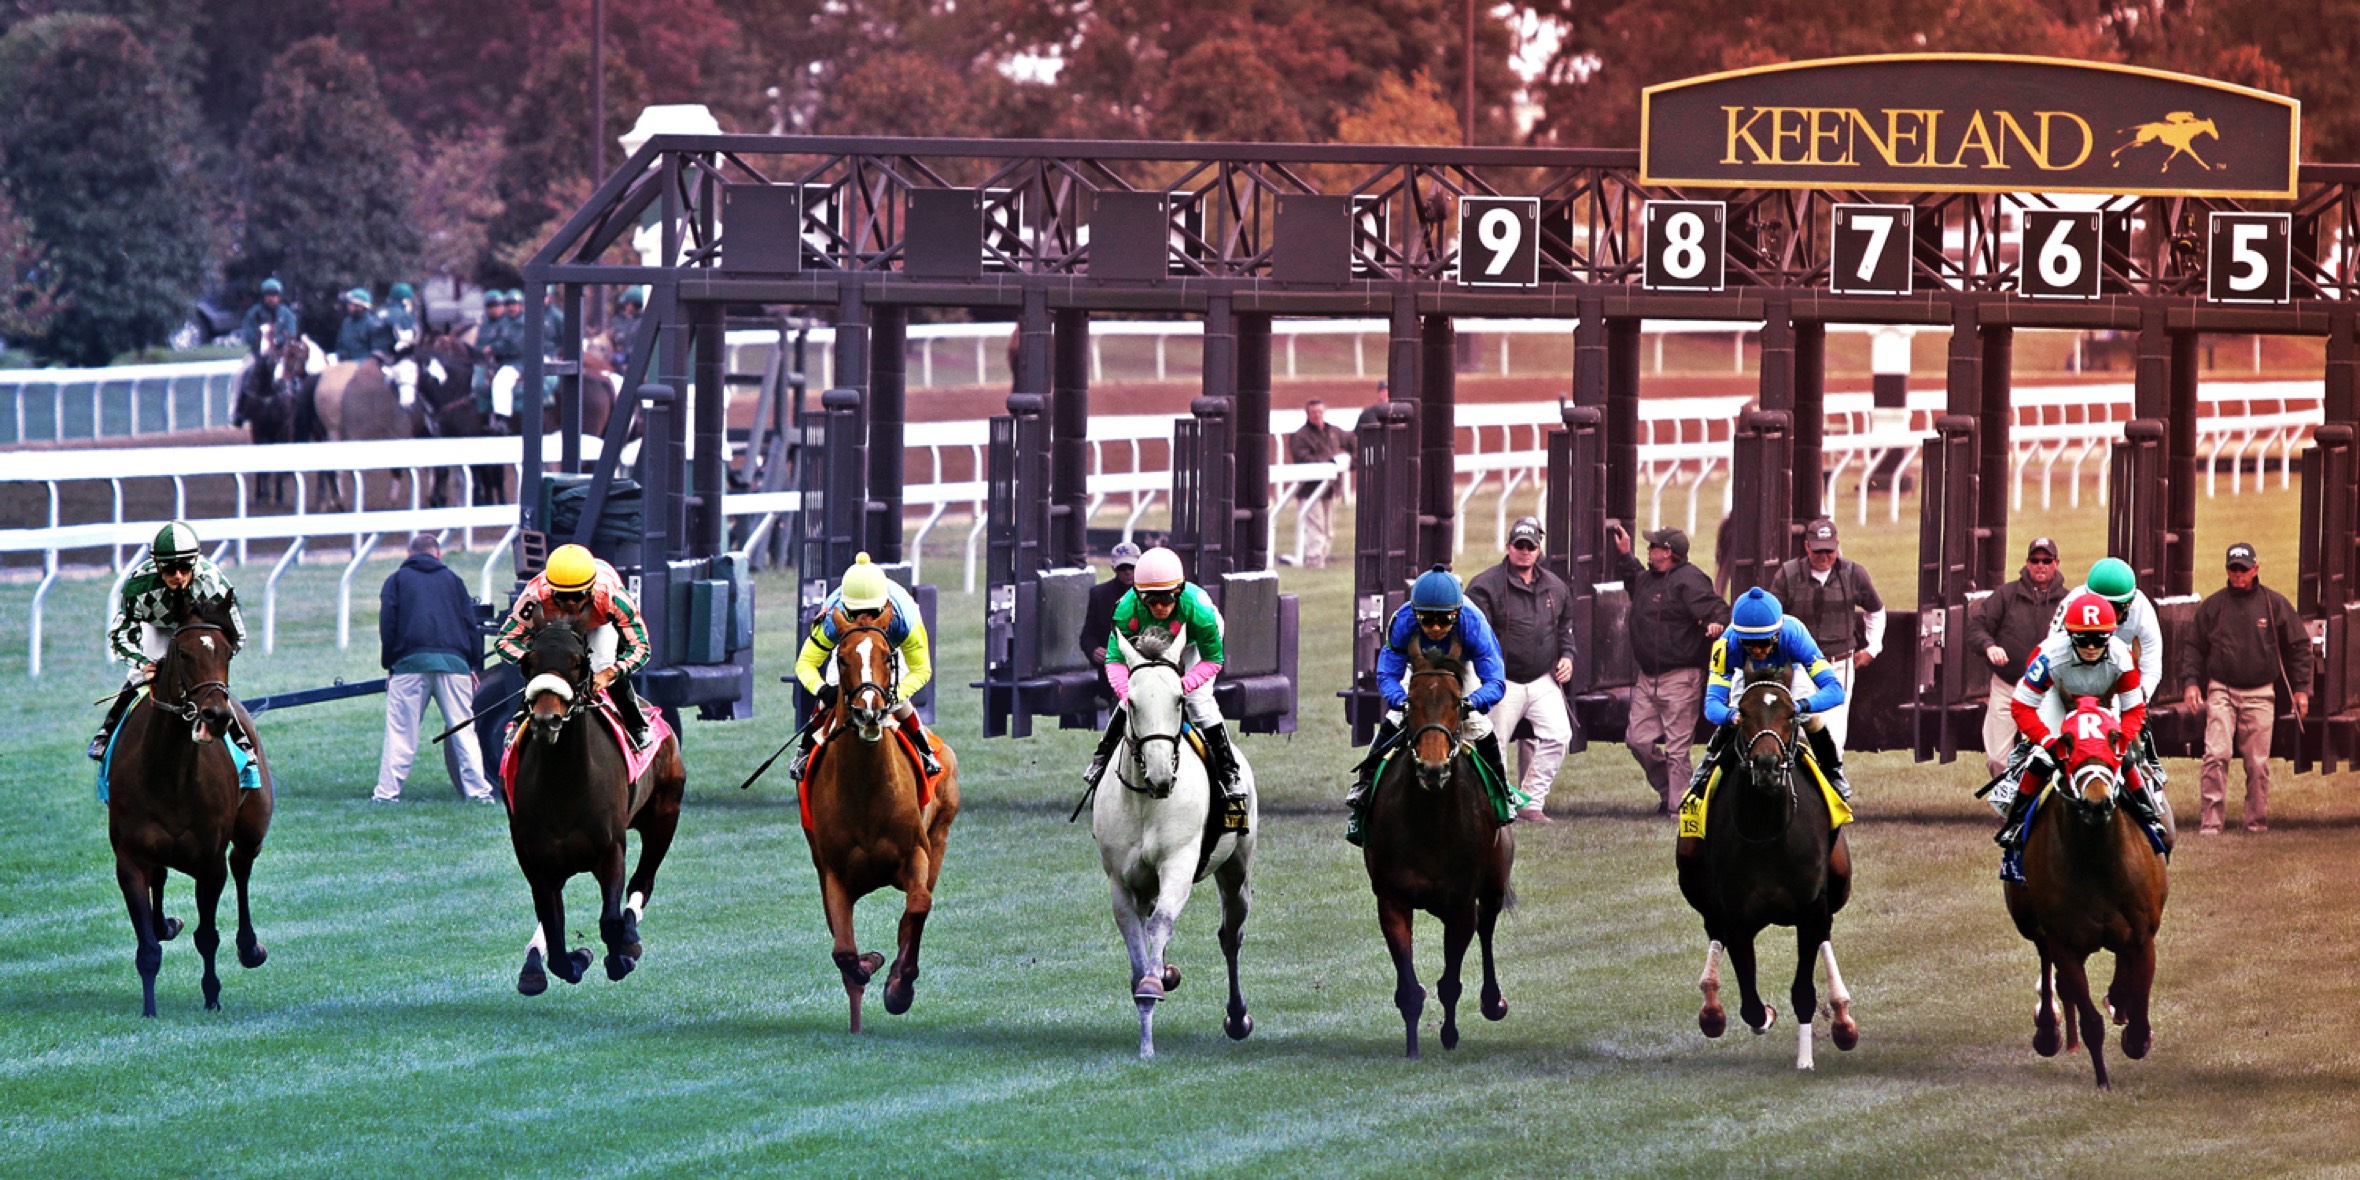 Photoshopped image of horse and jockey in New Years attire